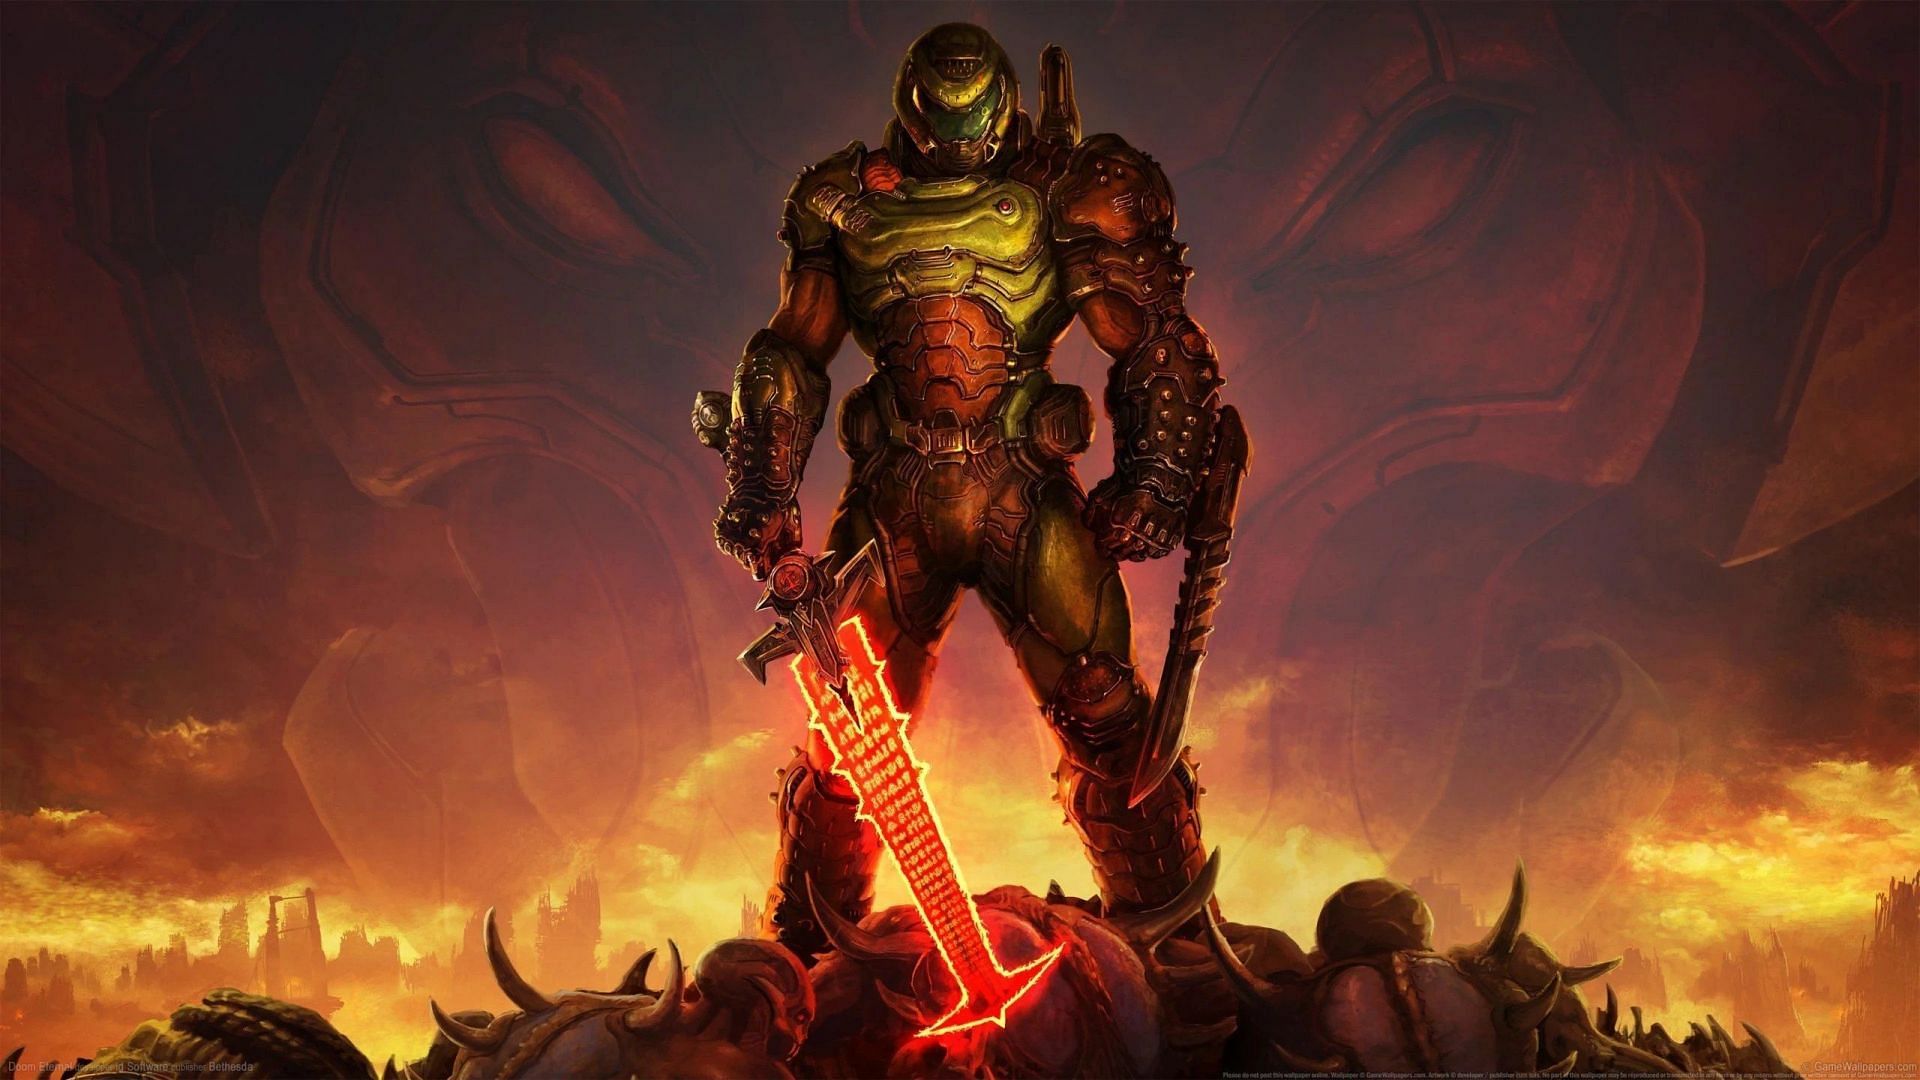 Doom Slayer will most likely come to Fortnite Battle Royale very soon (Image via id Software)